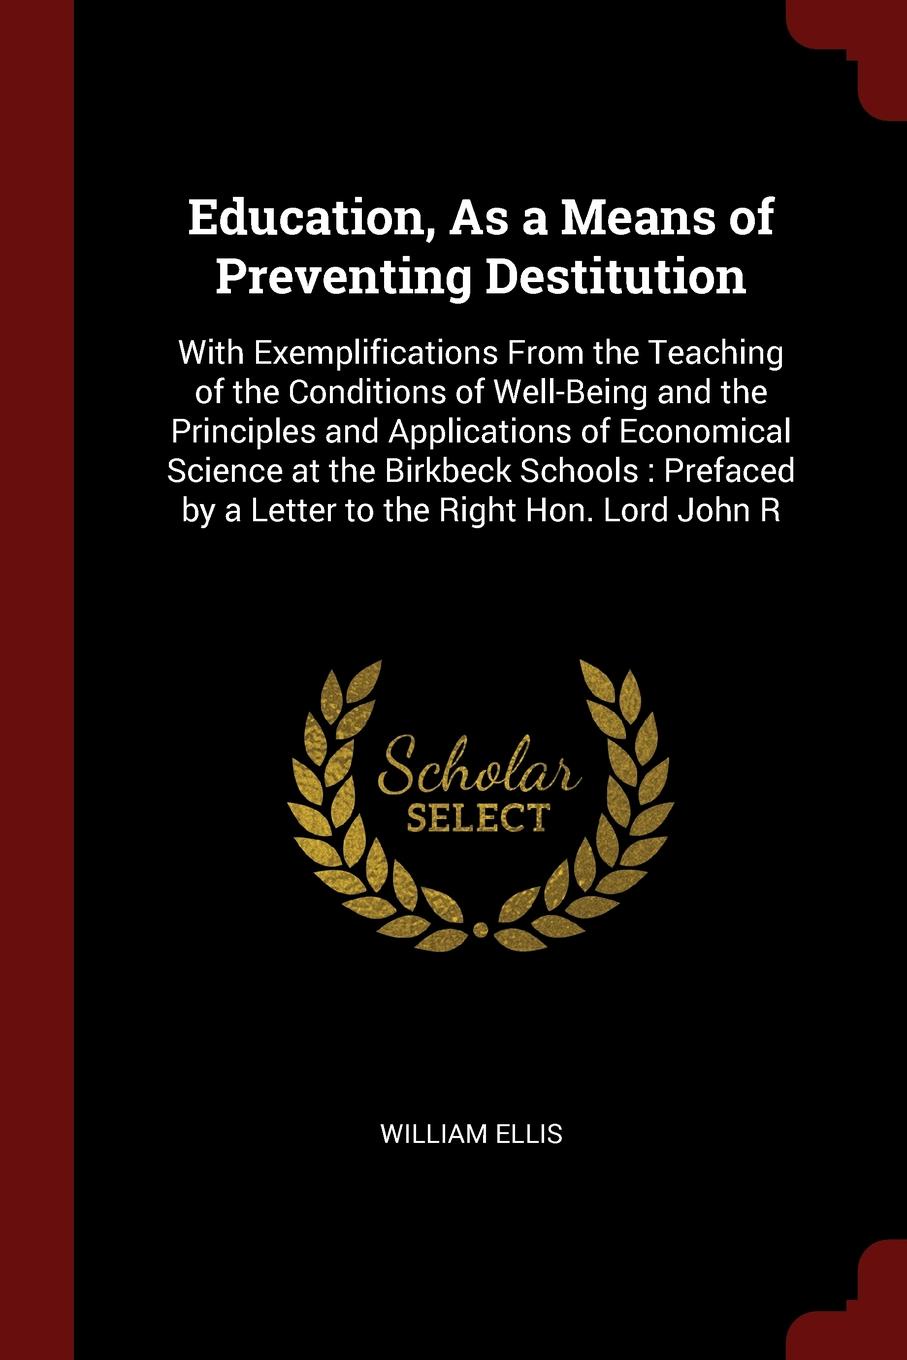 Education, As a Means of Preventing Destitution. With Exemplifications From the Teaching of the Conditions of Well-Being and the Principles and Applications of Economical Science at the Birkbeck Schools : Prefaced by a Letter to the Right Hon. Lor...